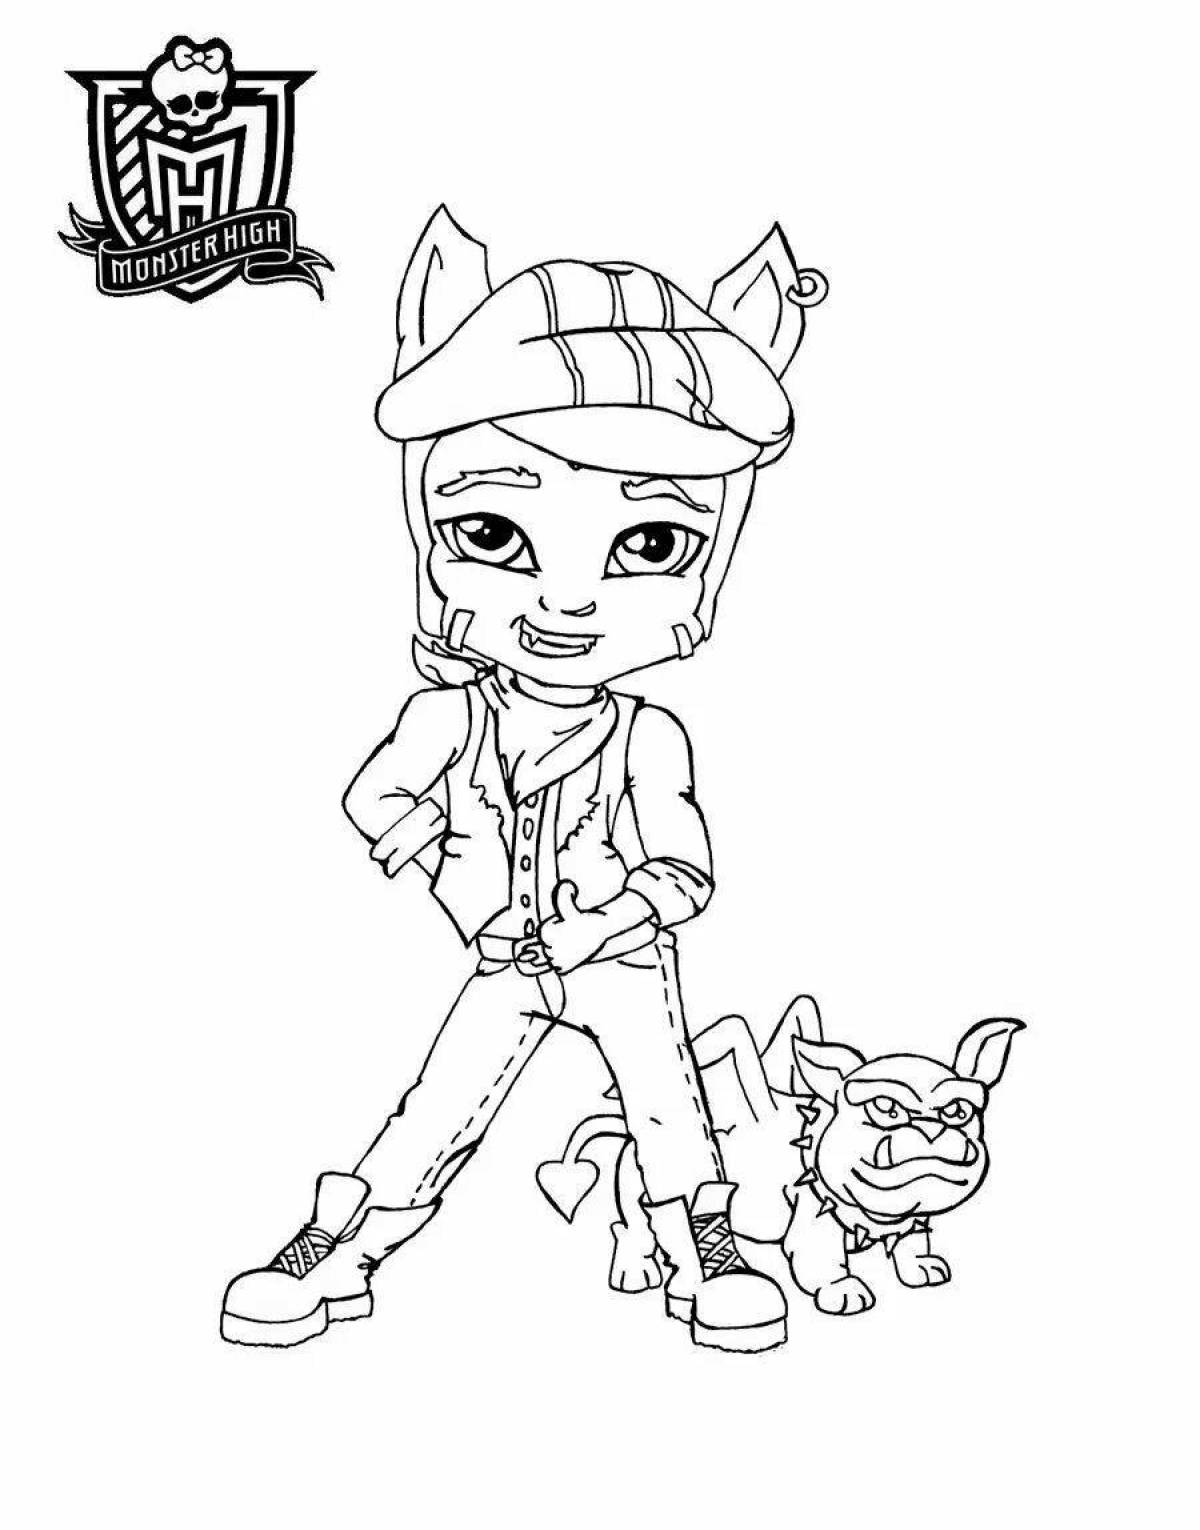 Delightful monster high boys coloring pages